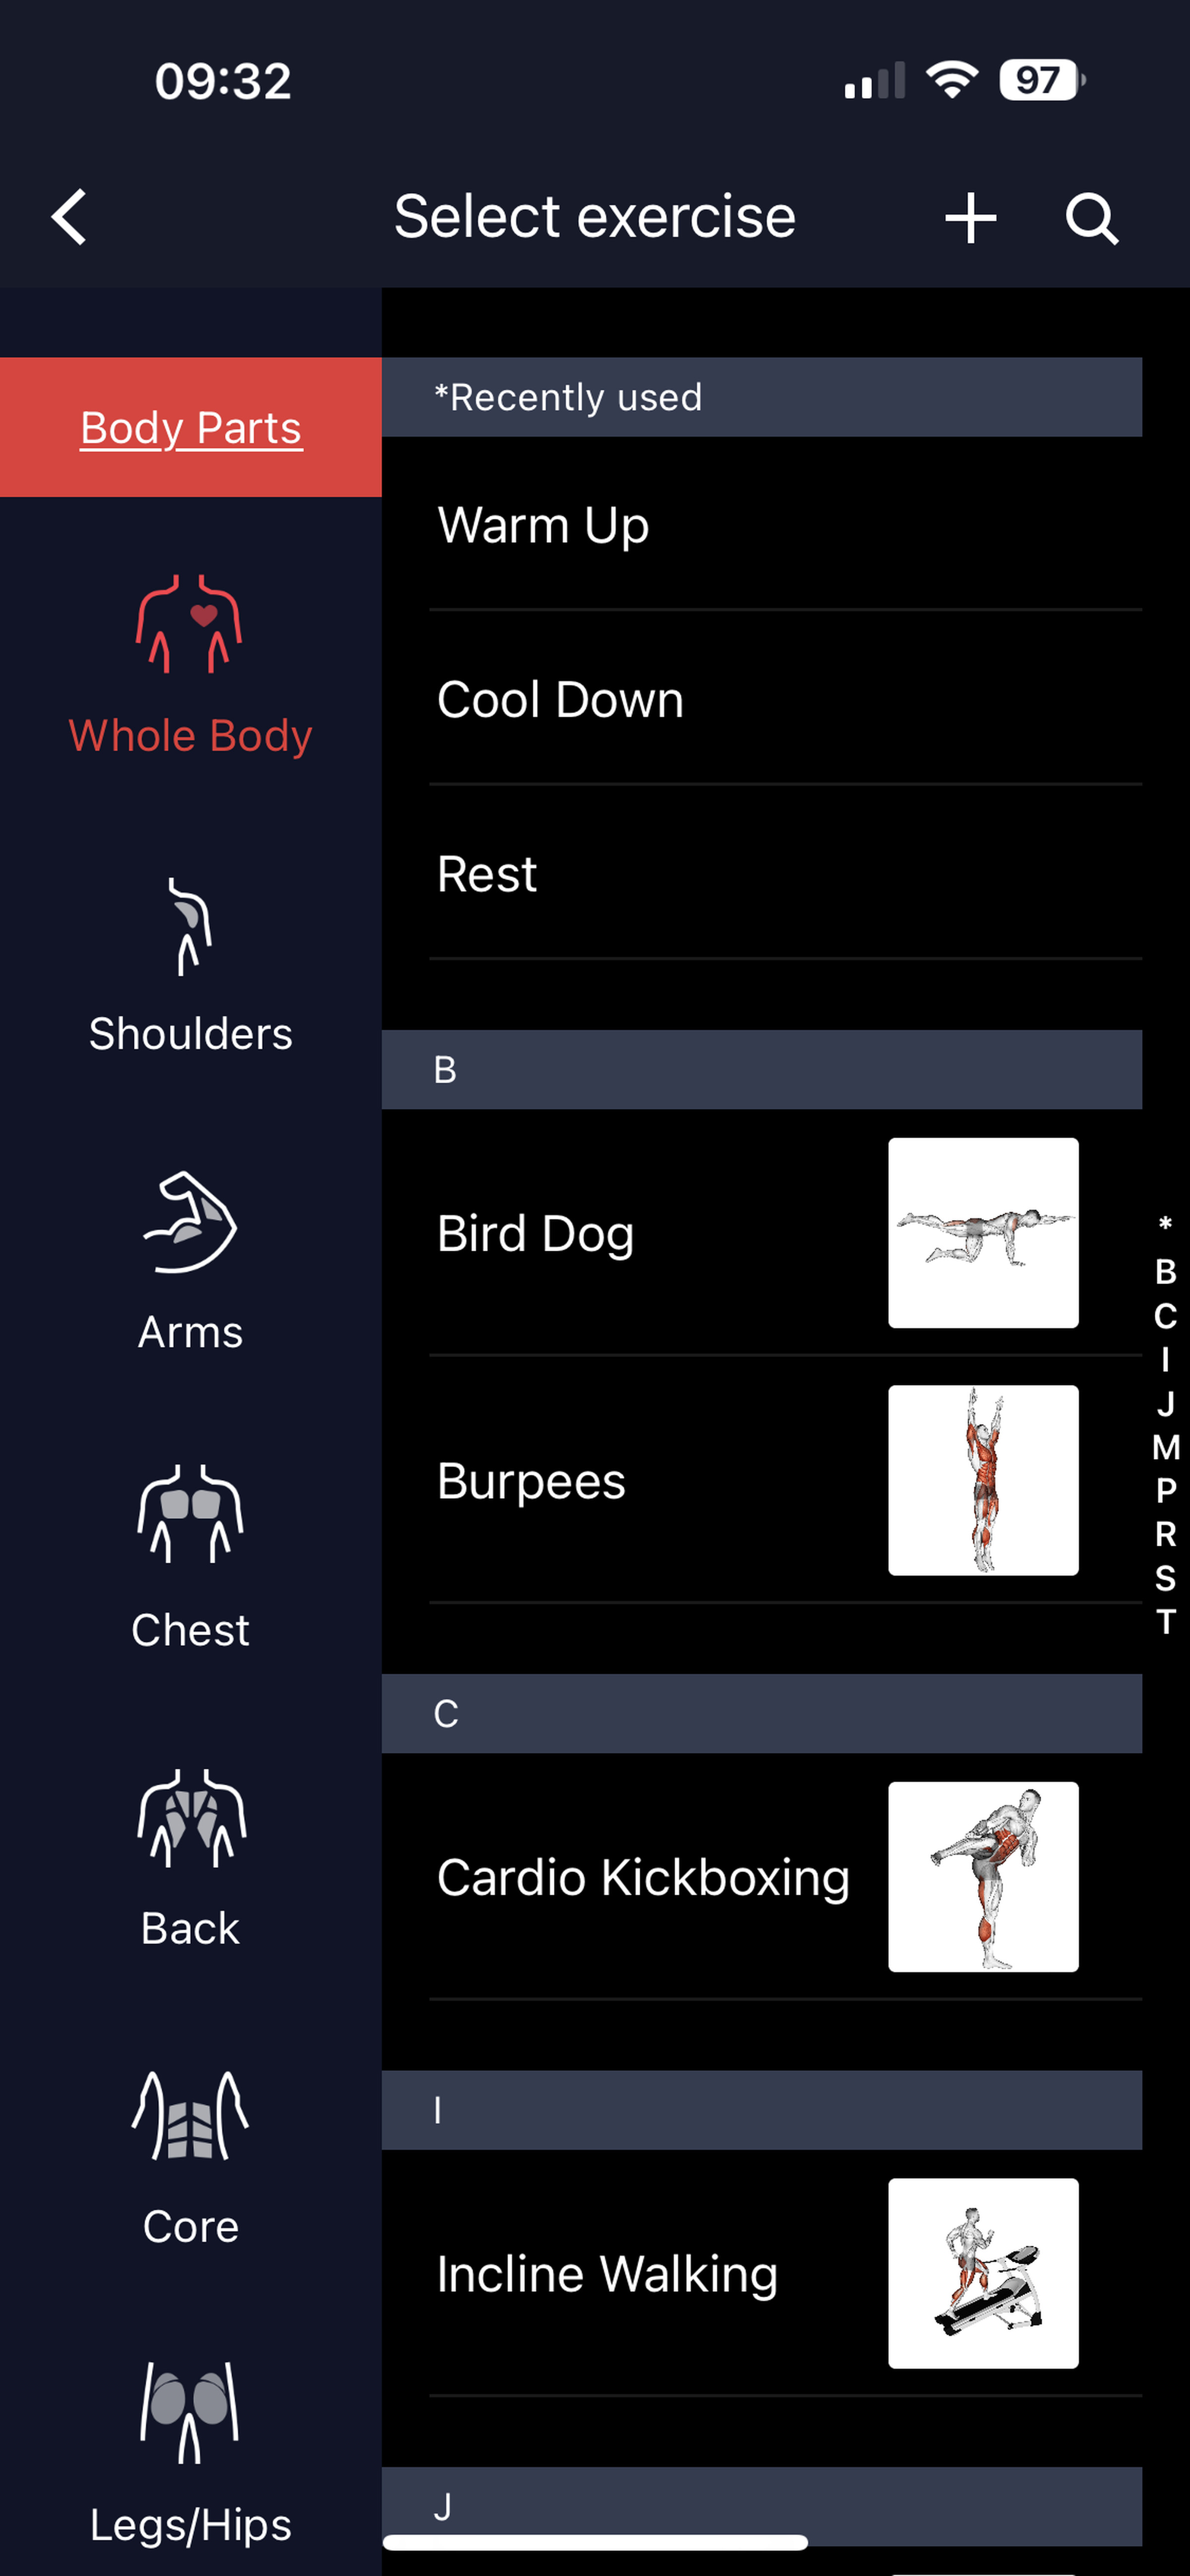 <em>The Coros app has one of the better approaches to strength training.</em>  